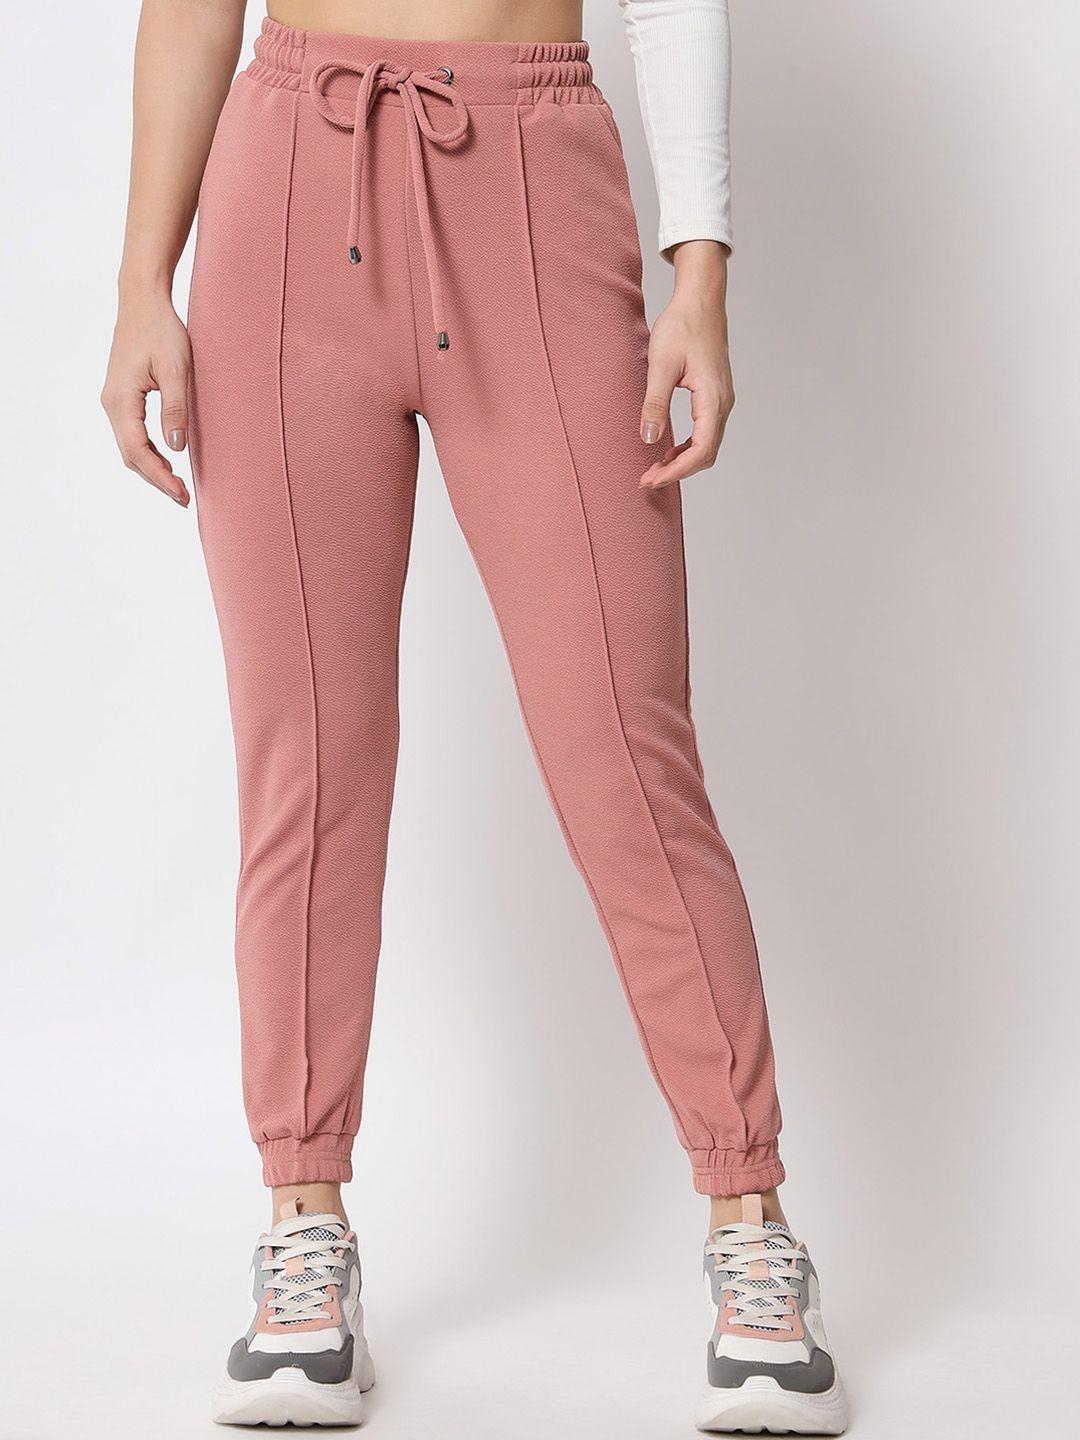 q-rious women pink striped pleated joggers trousers